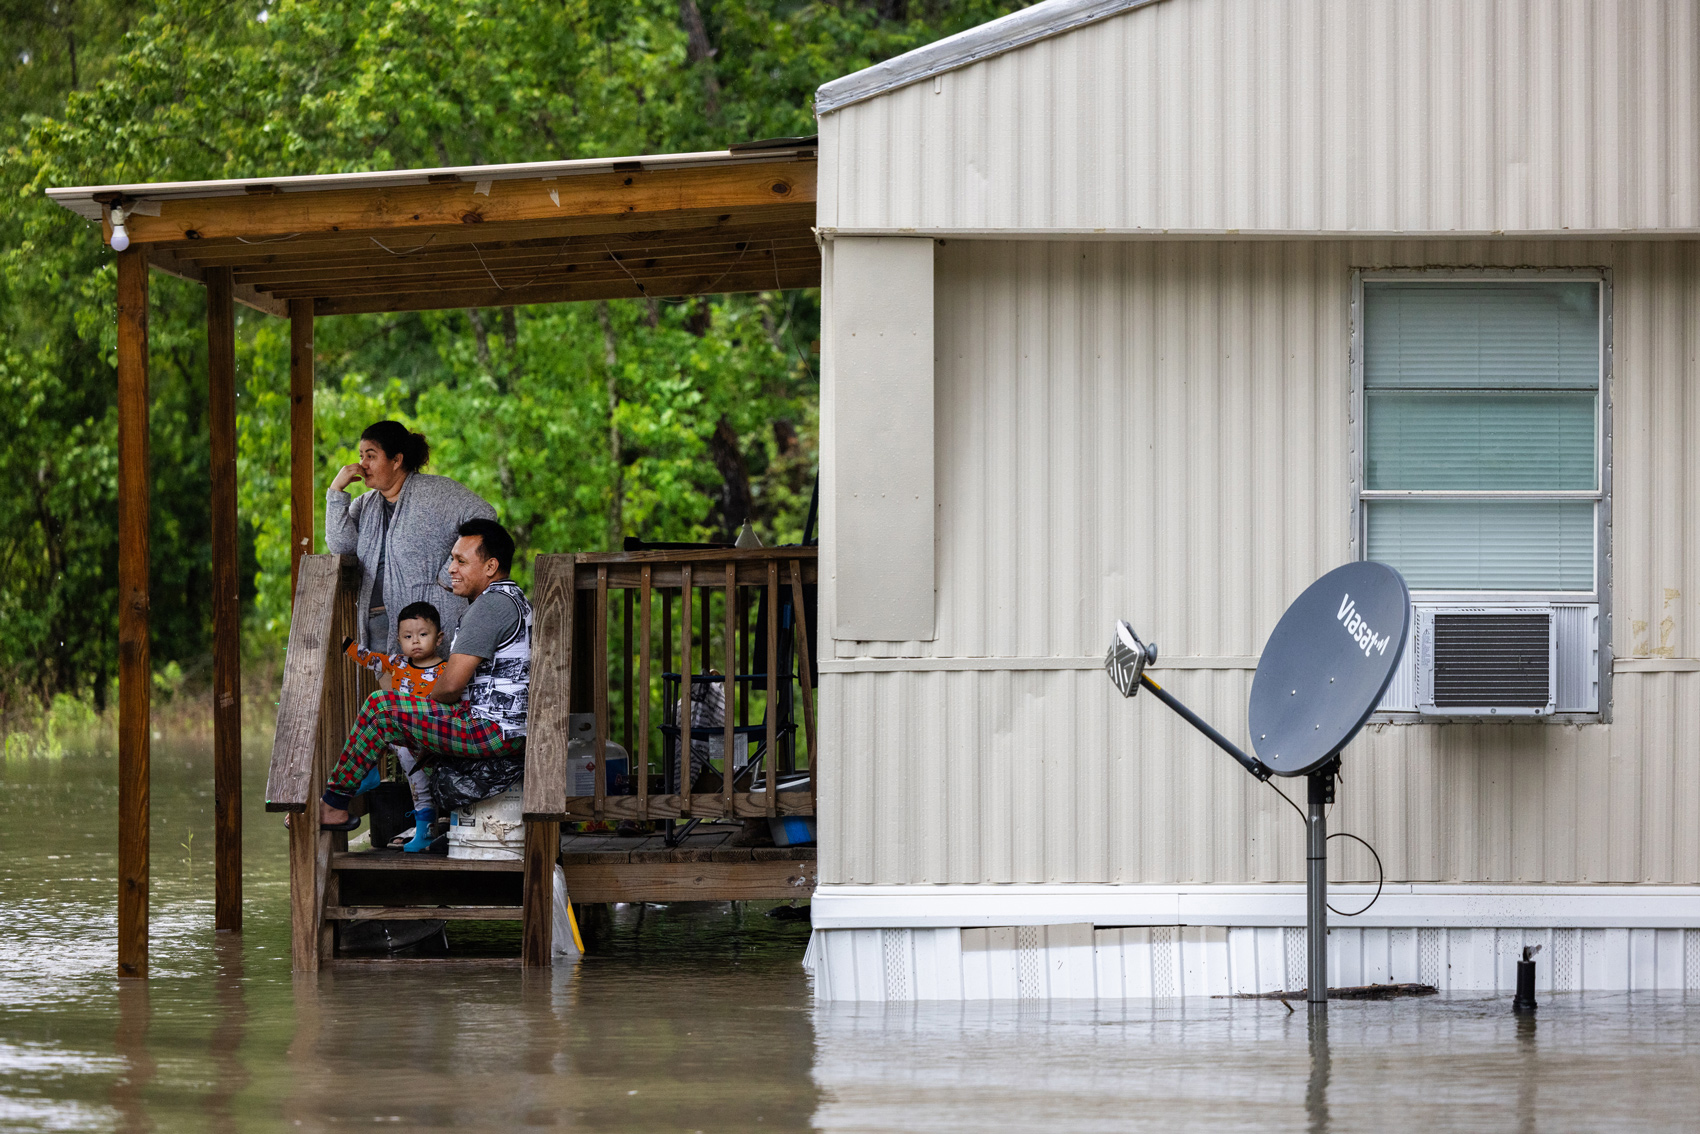 A family watches as floodwaters surrounds them near New Caney after torrential rain struck the region